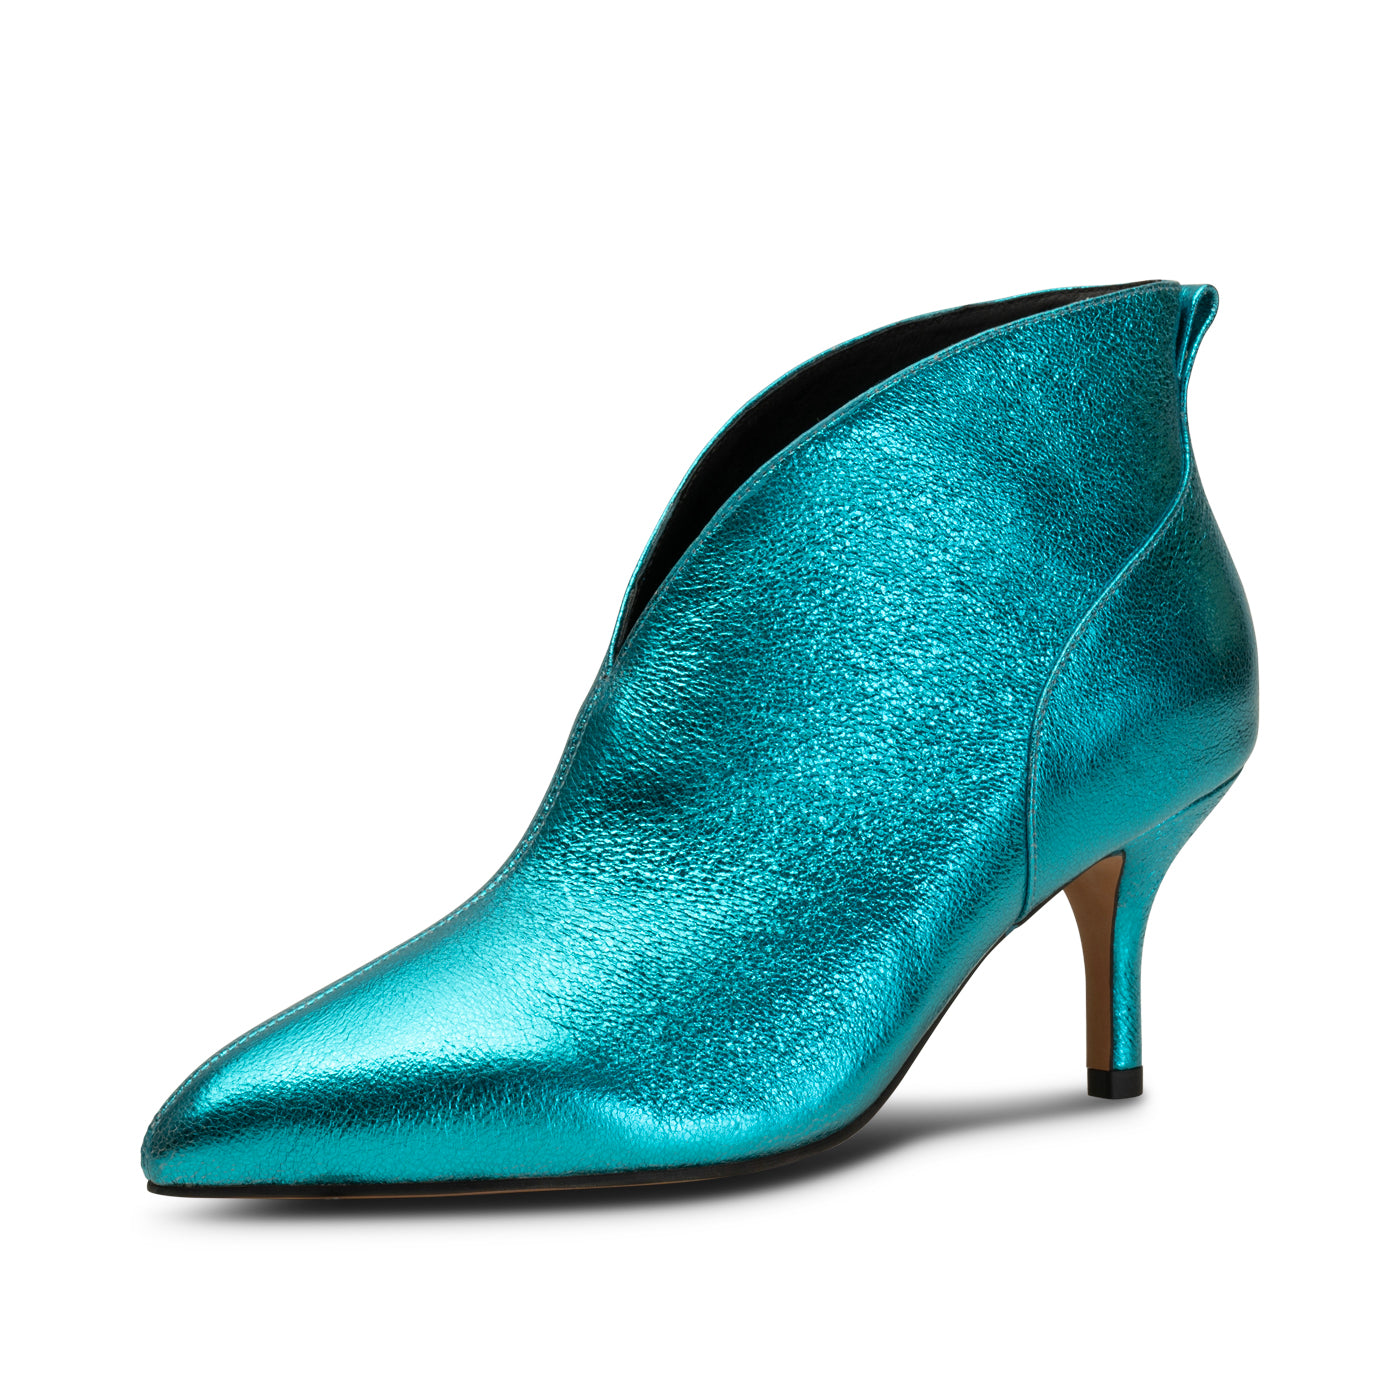 SHOE THE BEAR WOMENS Valentine hæl læder Ankle Boots 983 TURQUOISE METALLIC